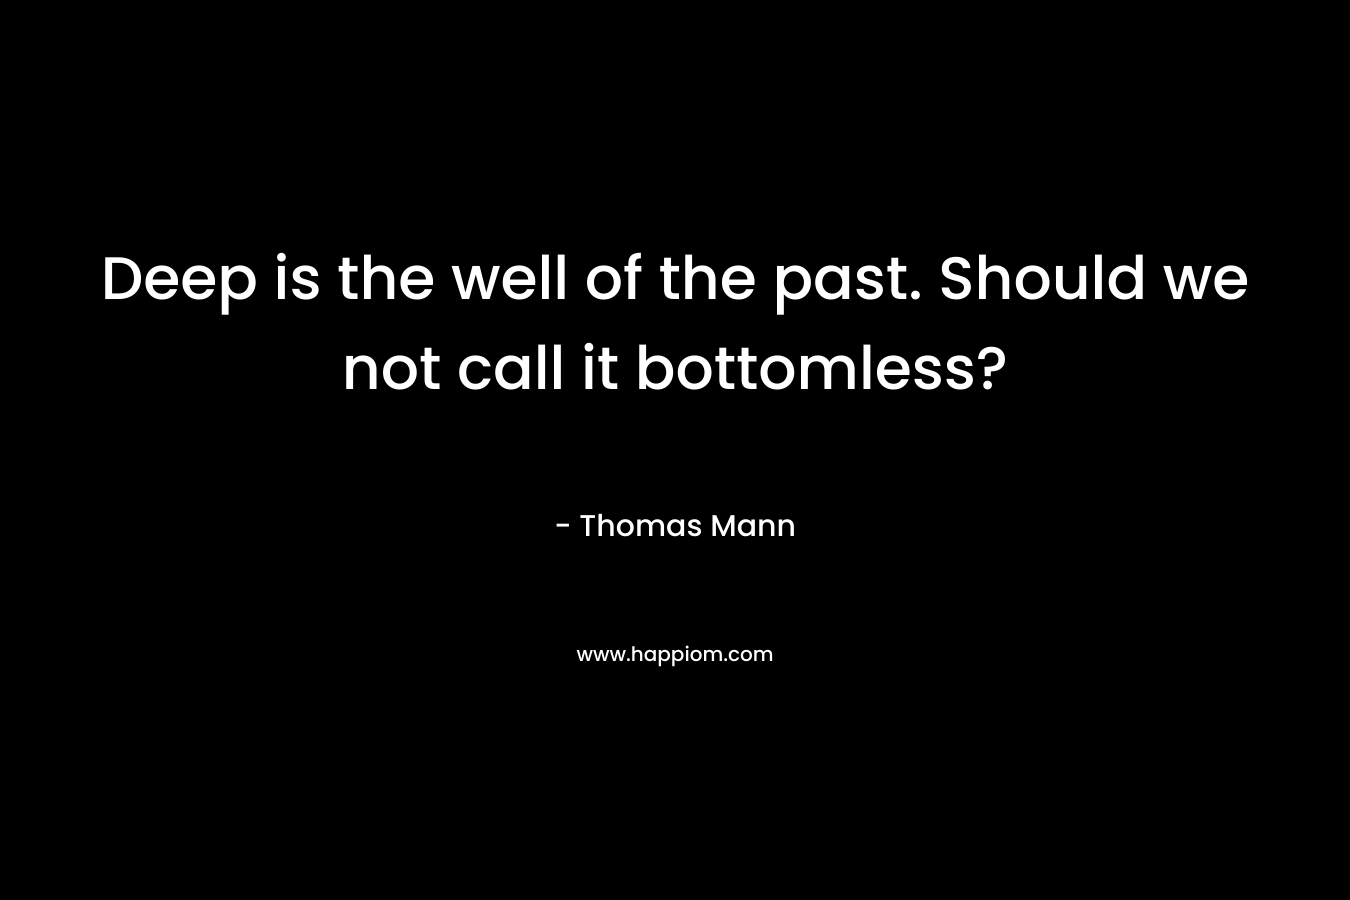 Deep is the well of the past. Should we not call it bottomless? – Thomas Mann